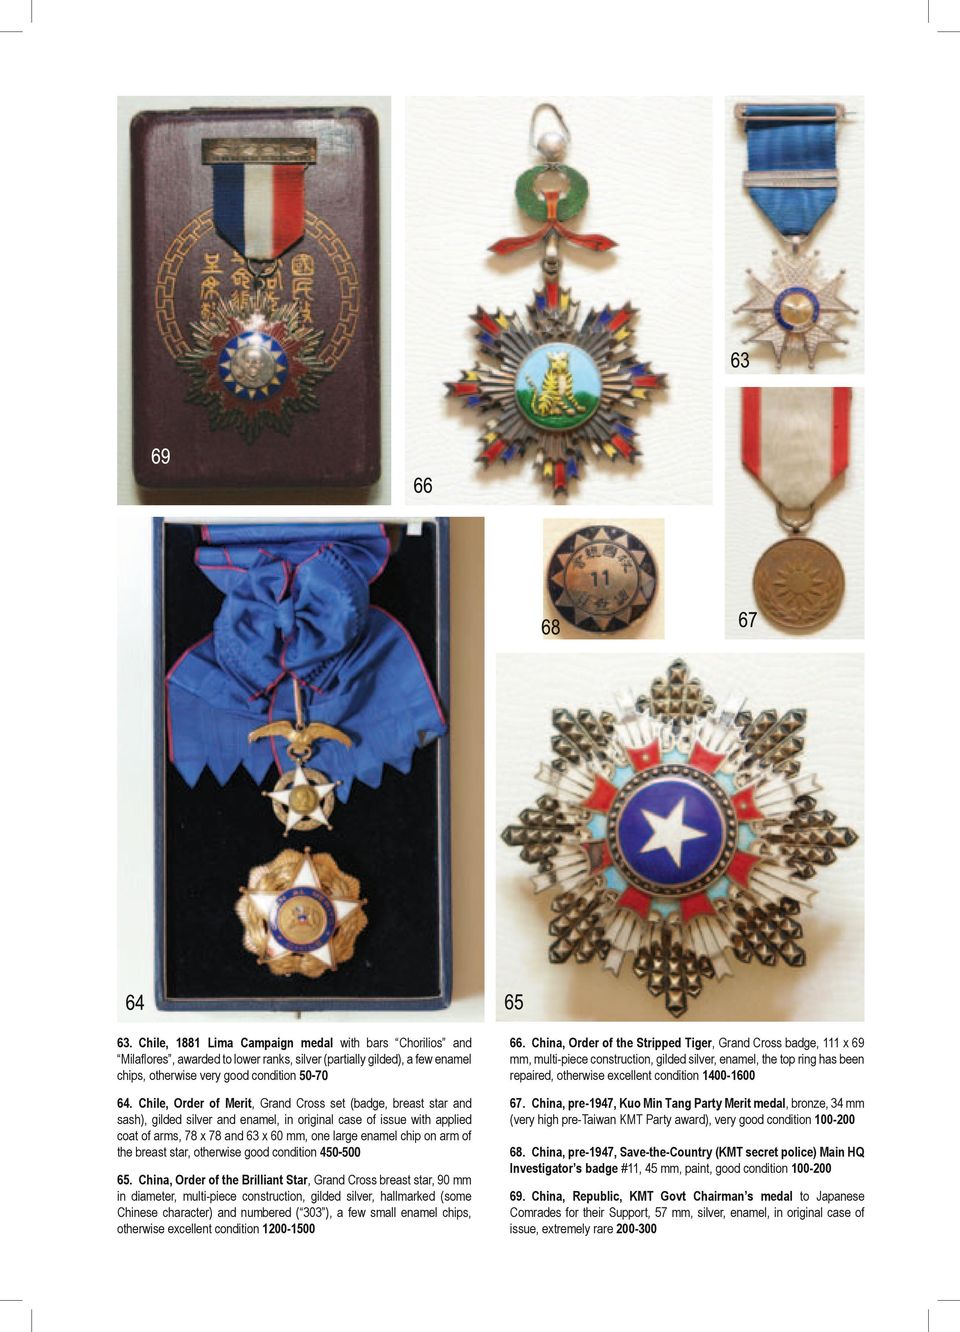 Chile, Order of Merit, Grand Cross set (badge, breast star and sash), gilded silver and enamel, in original case of issue with applied coat of arms, 78 x 78 and 63 x 60 mm, one large enamel chip on